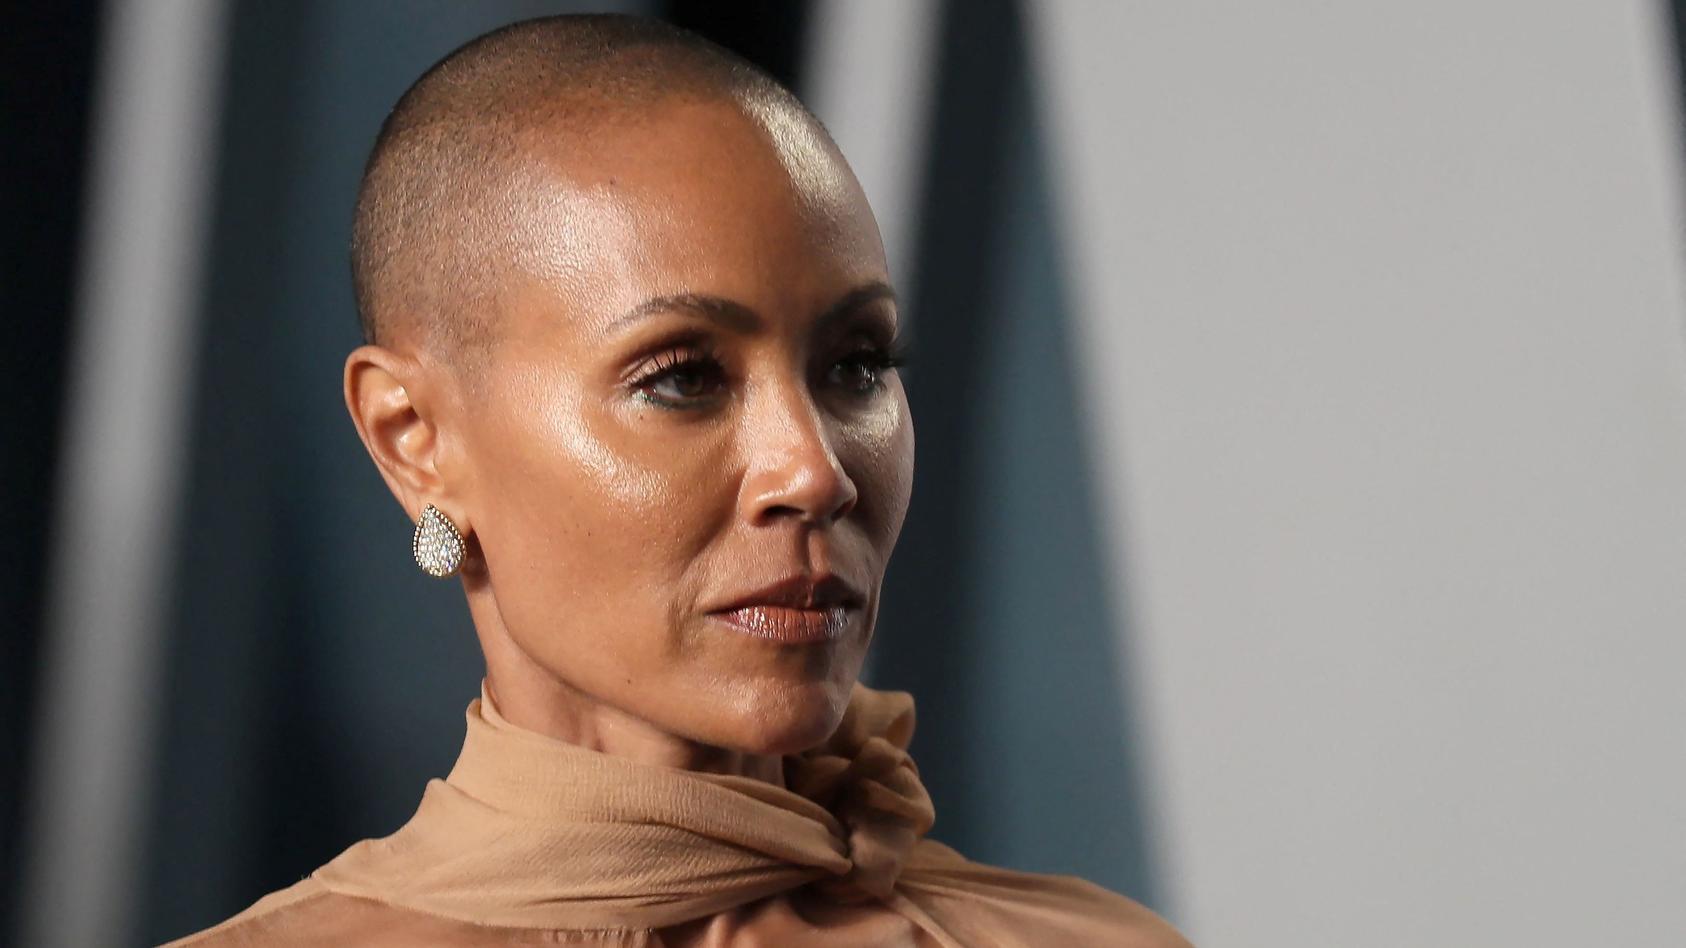 FILE PHOTO: Jada Pinkett Smith arrives at the Vanity Fair Oscar party during the 94th Academy Awards in Beverly Hills, California, U.S., March 27, 2022.   REUTERS/Danny Moloshok/File Photo